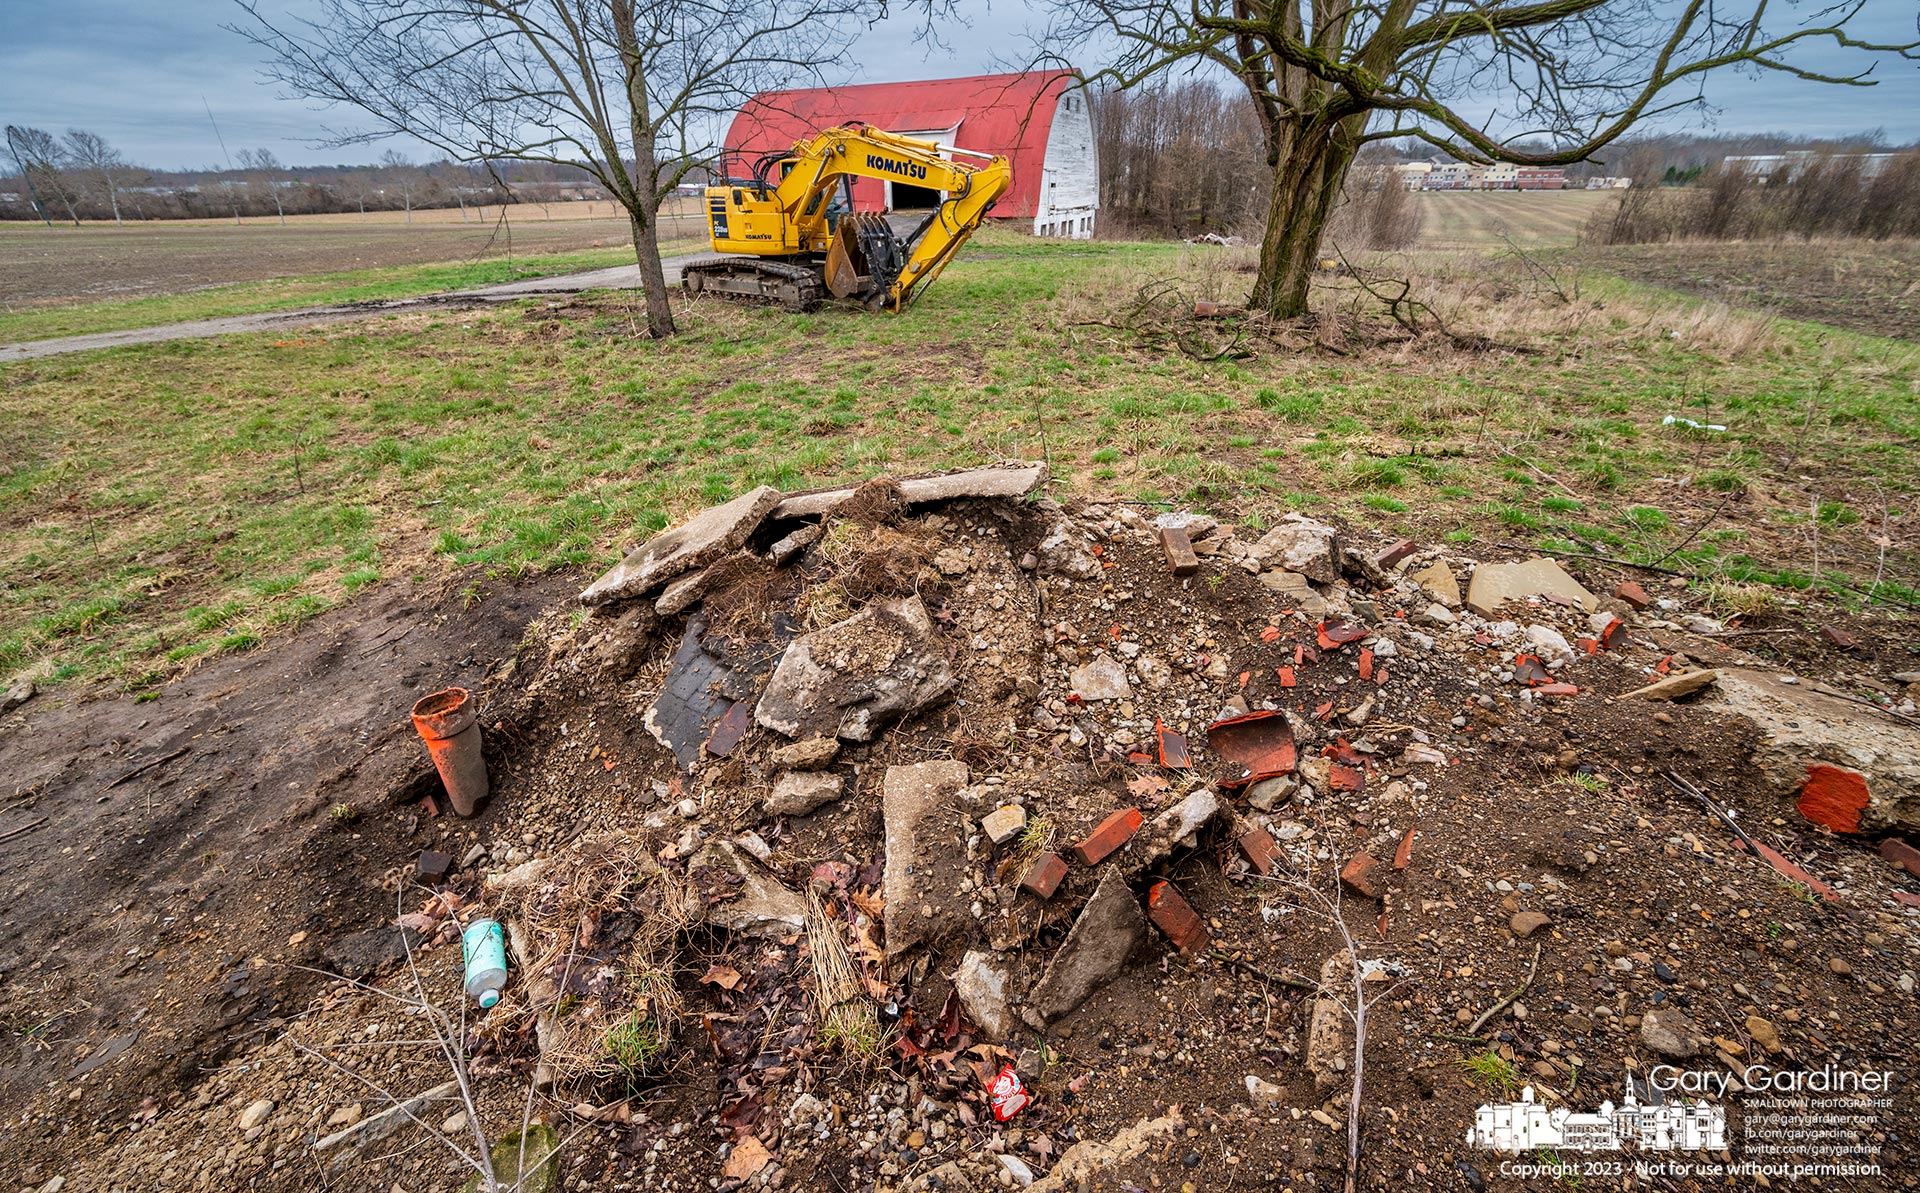 Newly arrived demolition equipment sits about equidistance from the barn and farmhouse at the Braun Farm as work progresses to demolish the two structures. My Final Photo for March 24, 2023.